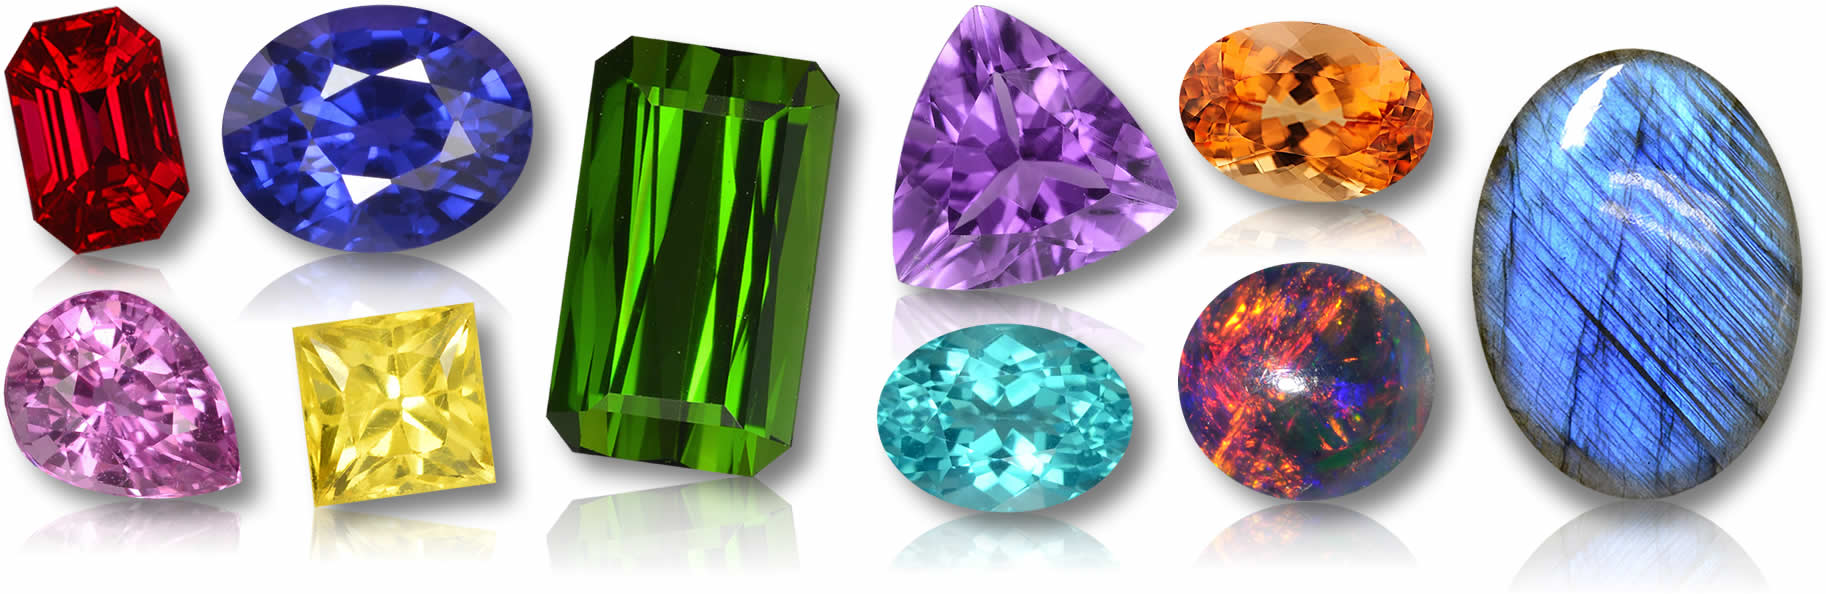 Guide to Buying Loose Gemstones Like a Pro